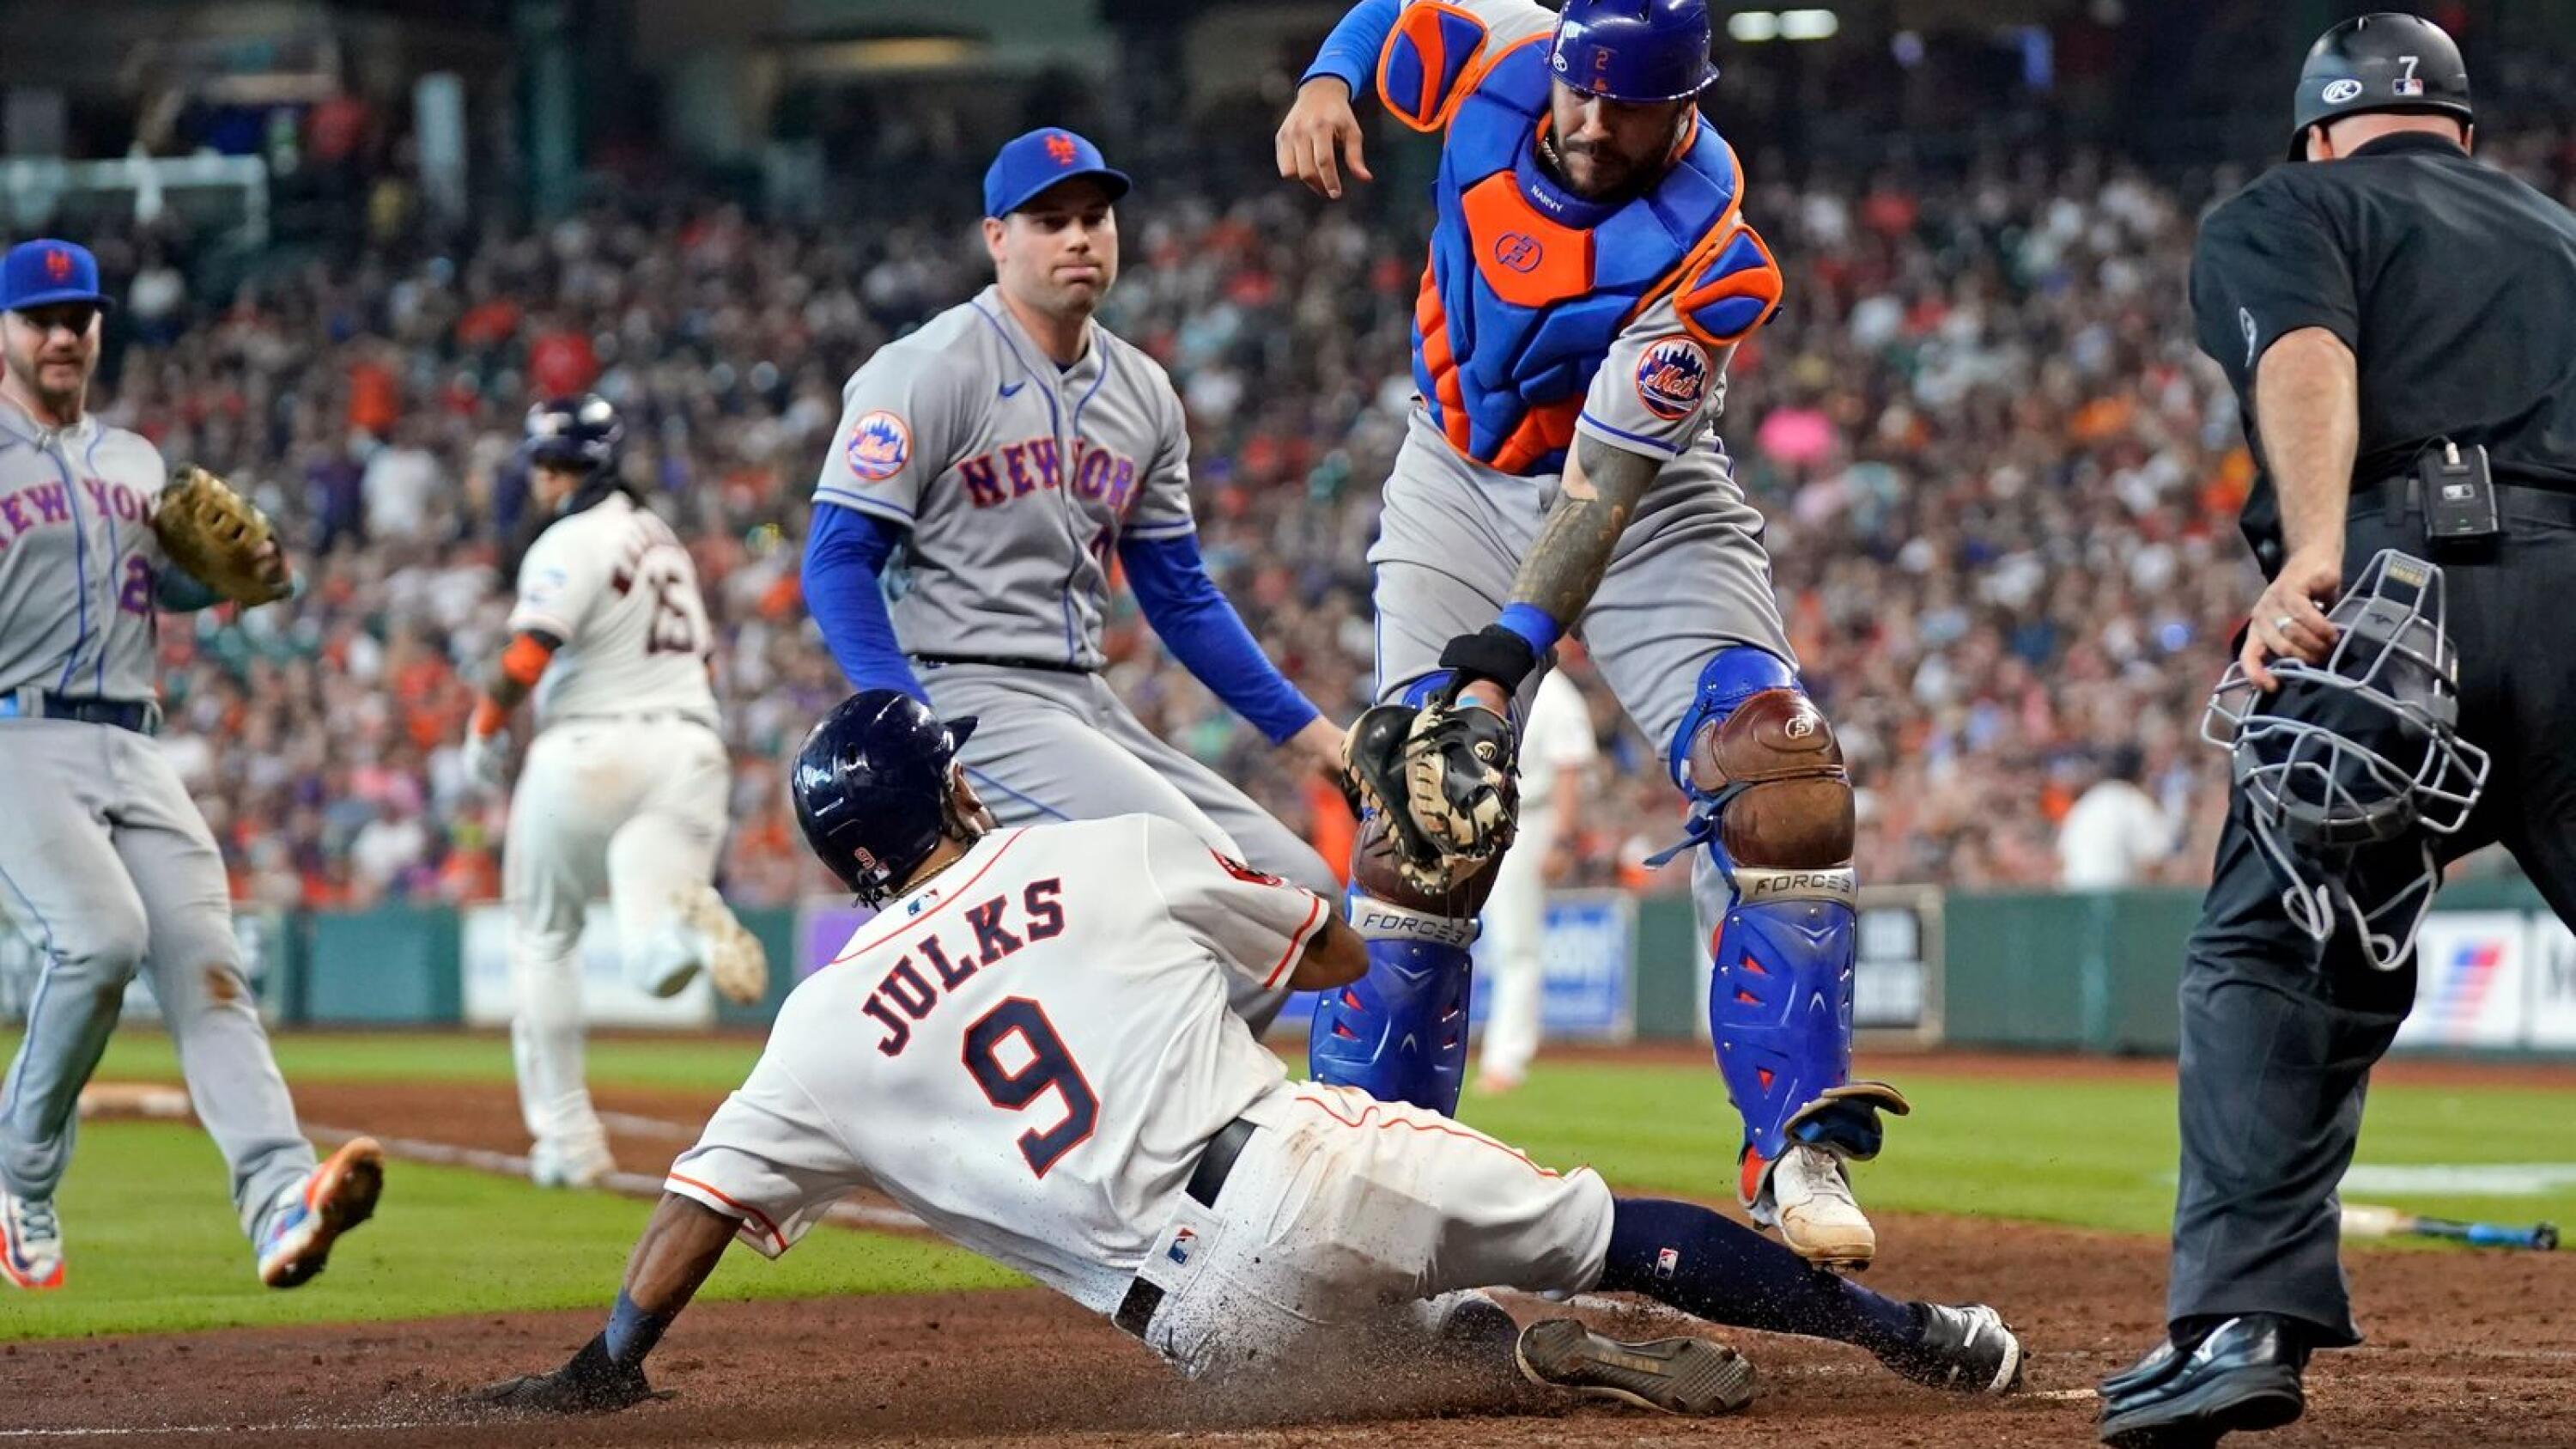 Bregman has 3 hits as Astros outlast Mets 10-8 to win series